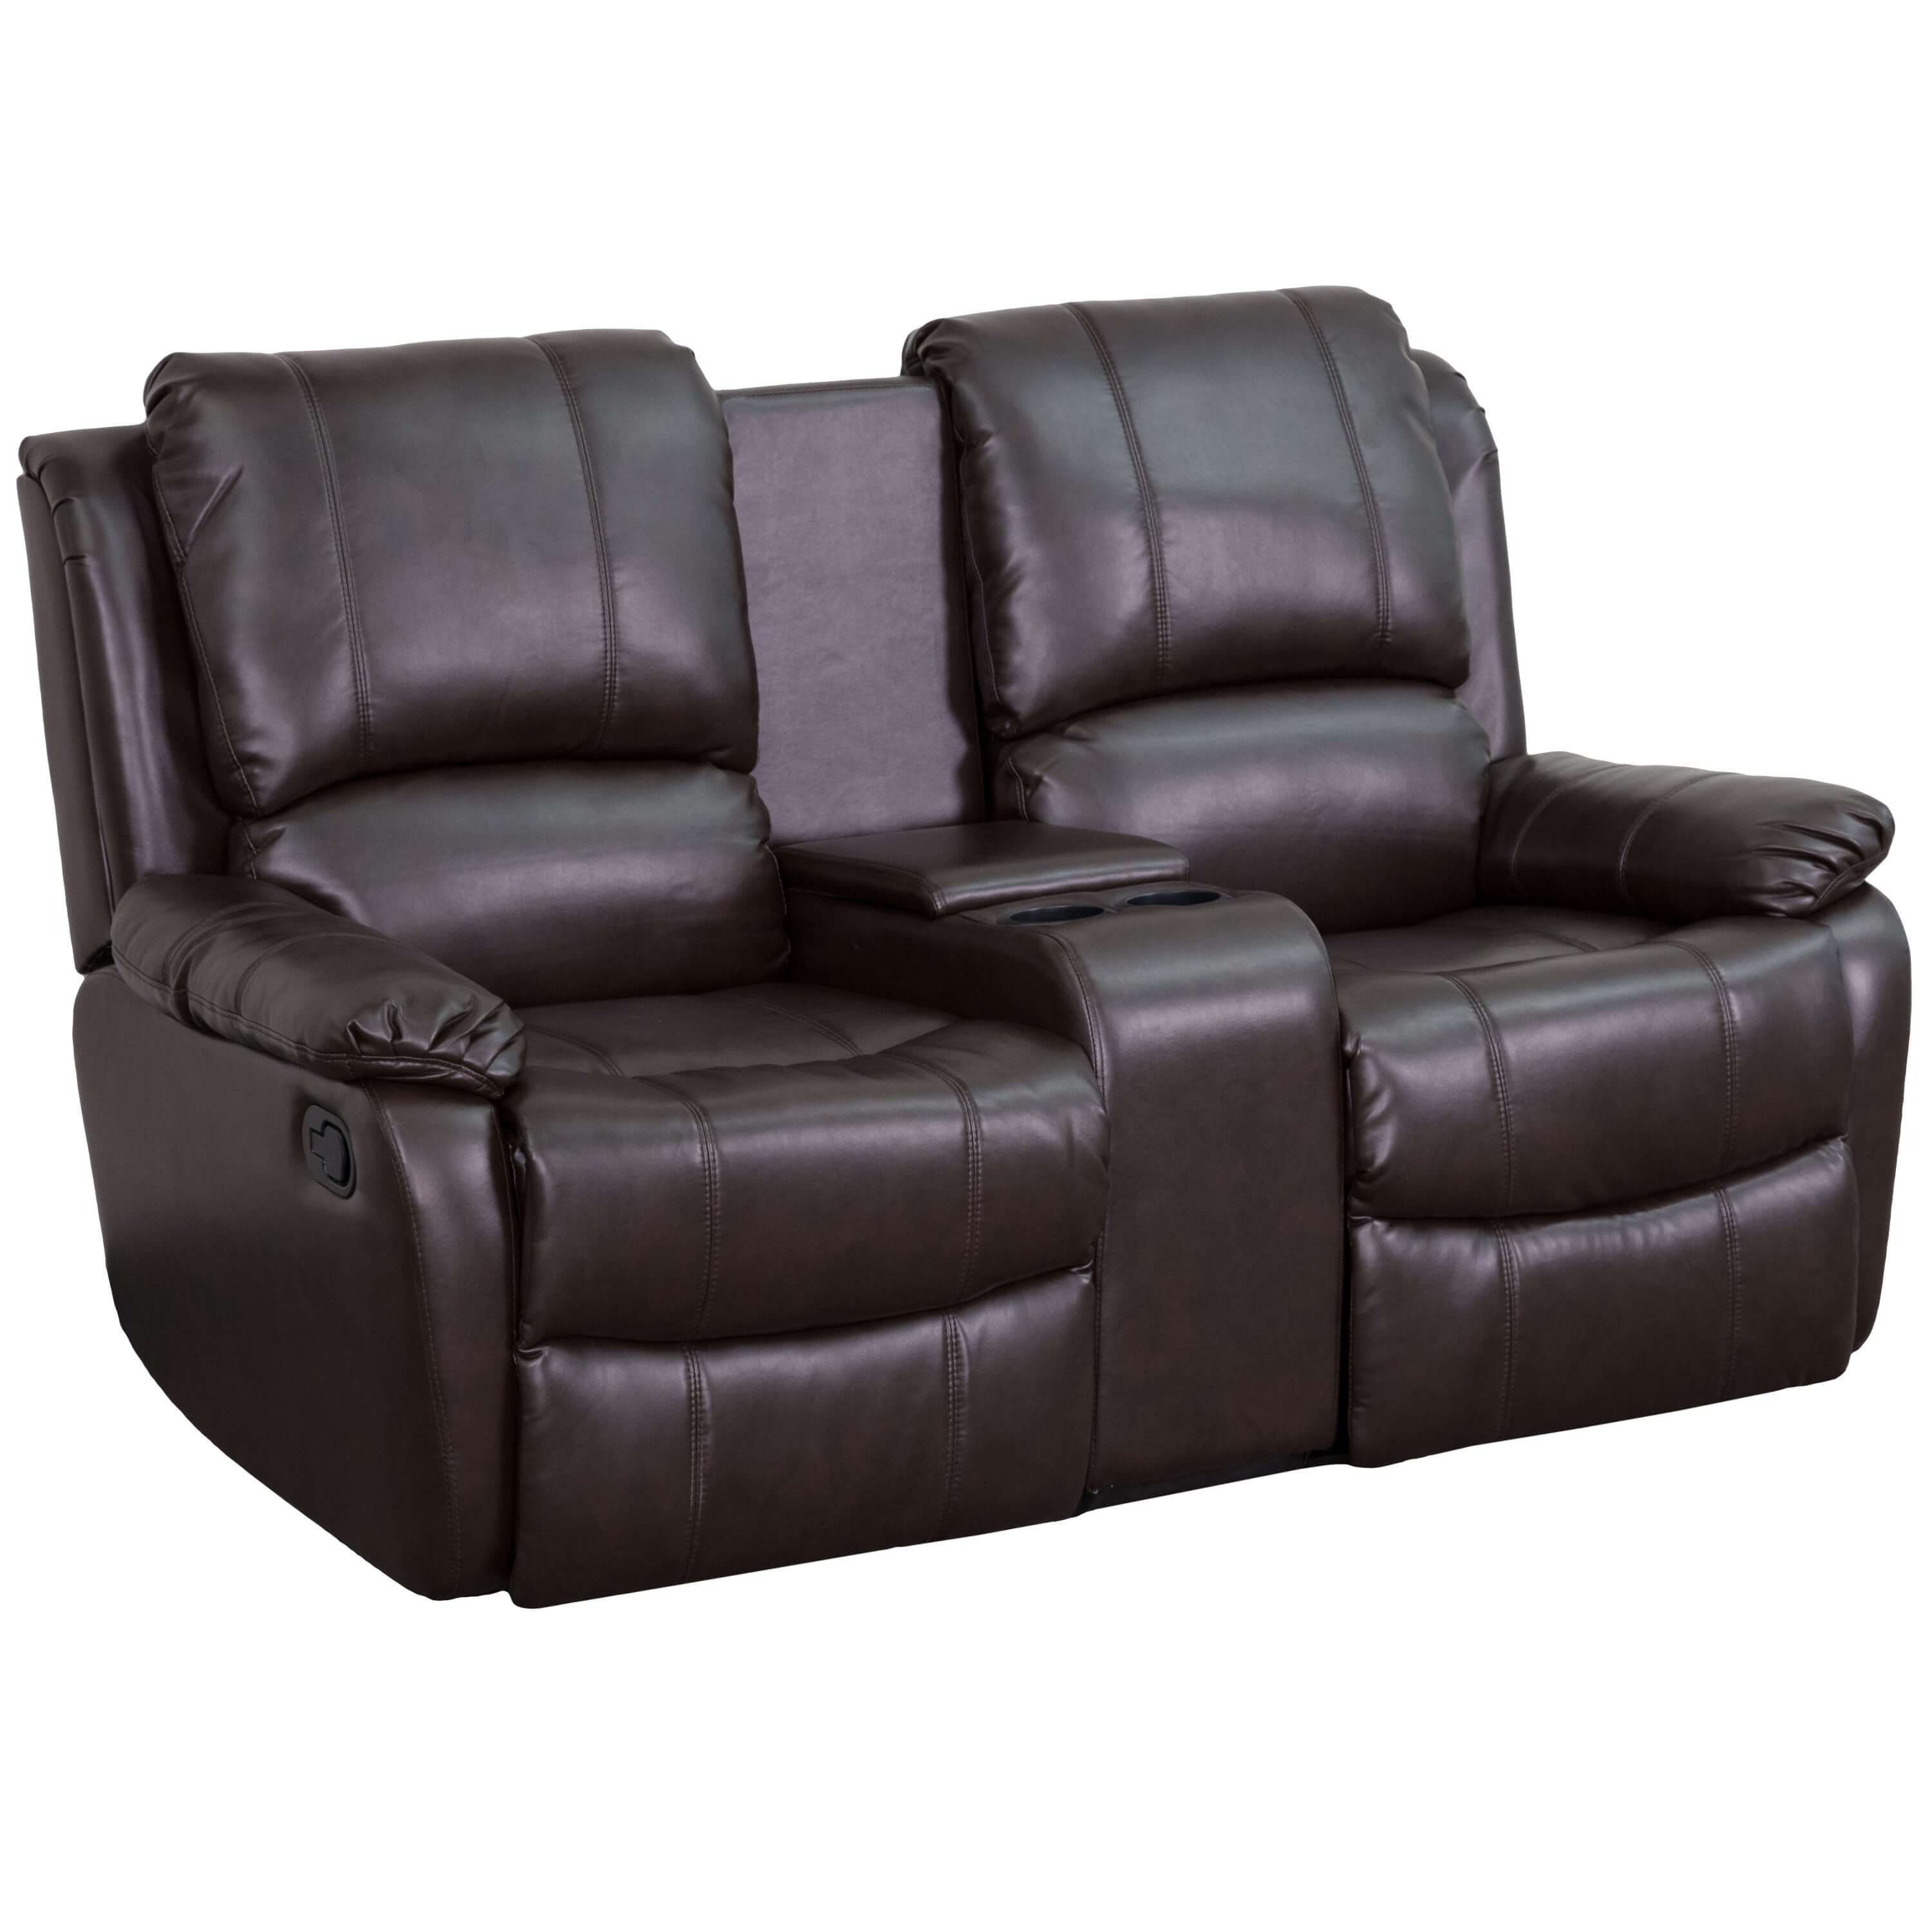 home-theatre-seating-recliner-chair-with-cup-holder.jpg